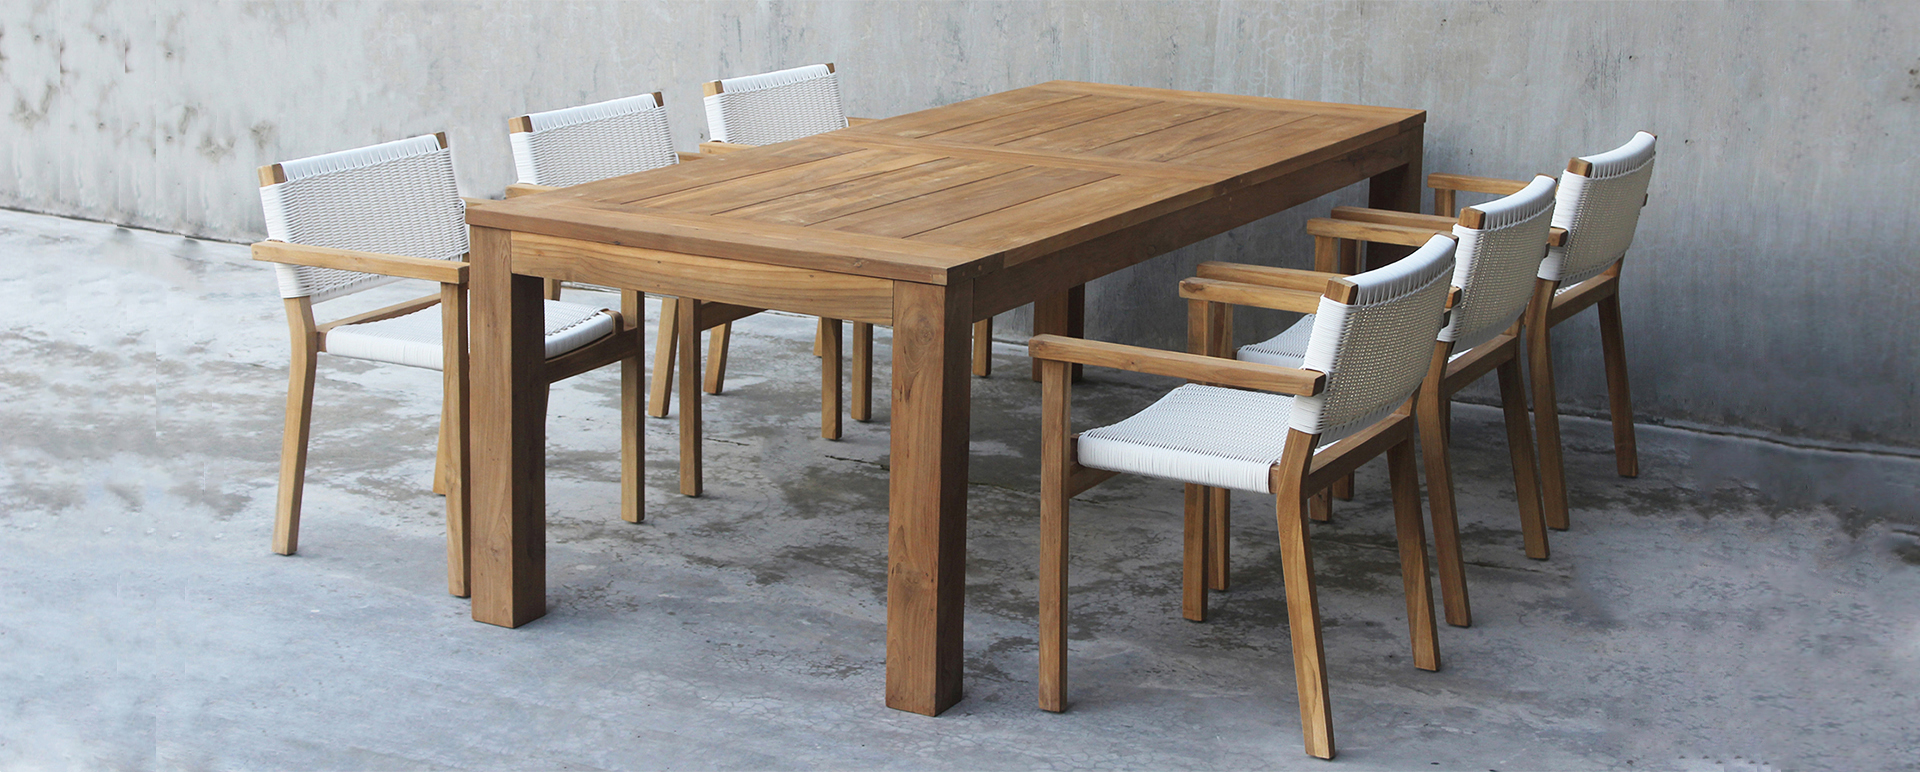 dining table outdoor